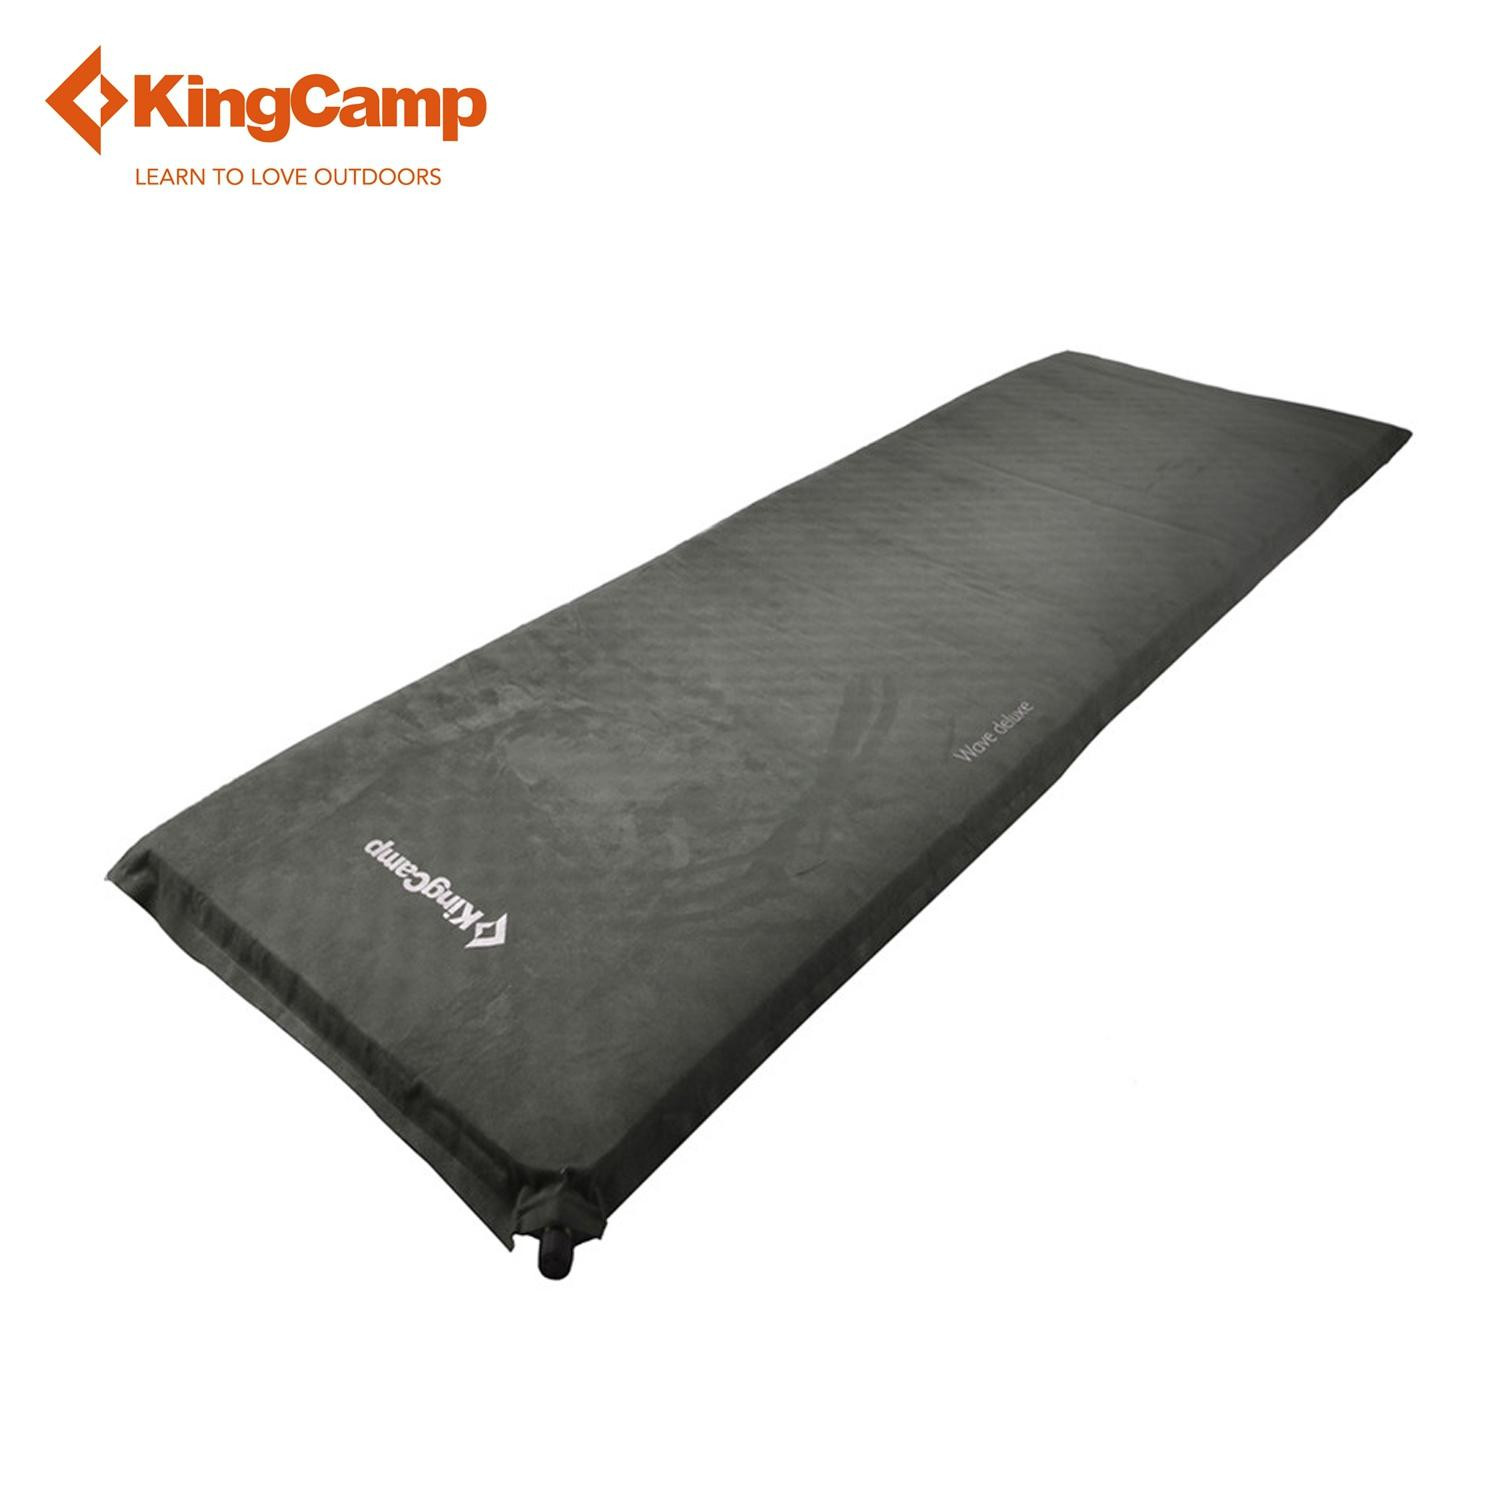 Kingcamp Camp Pad Mat Deluxe Single Damp-Proof Lightweight Self-Inflating